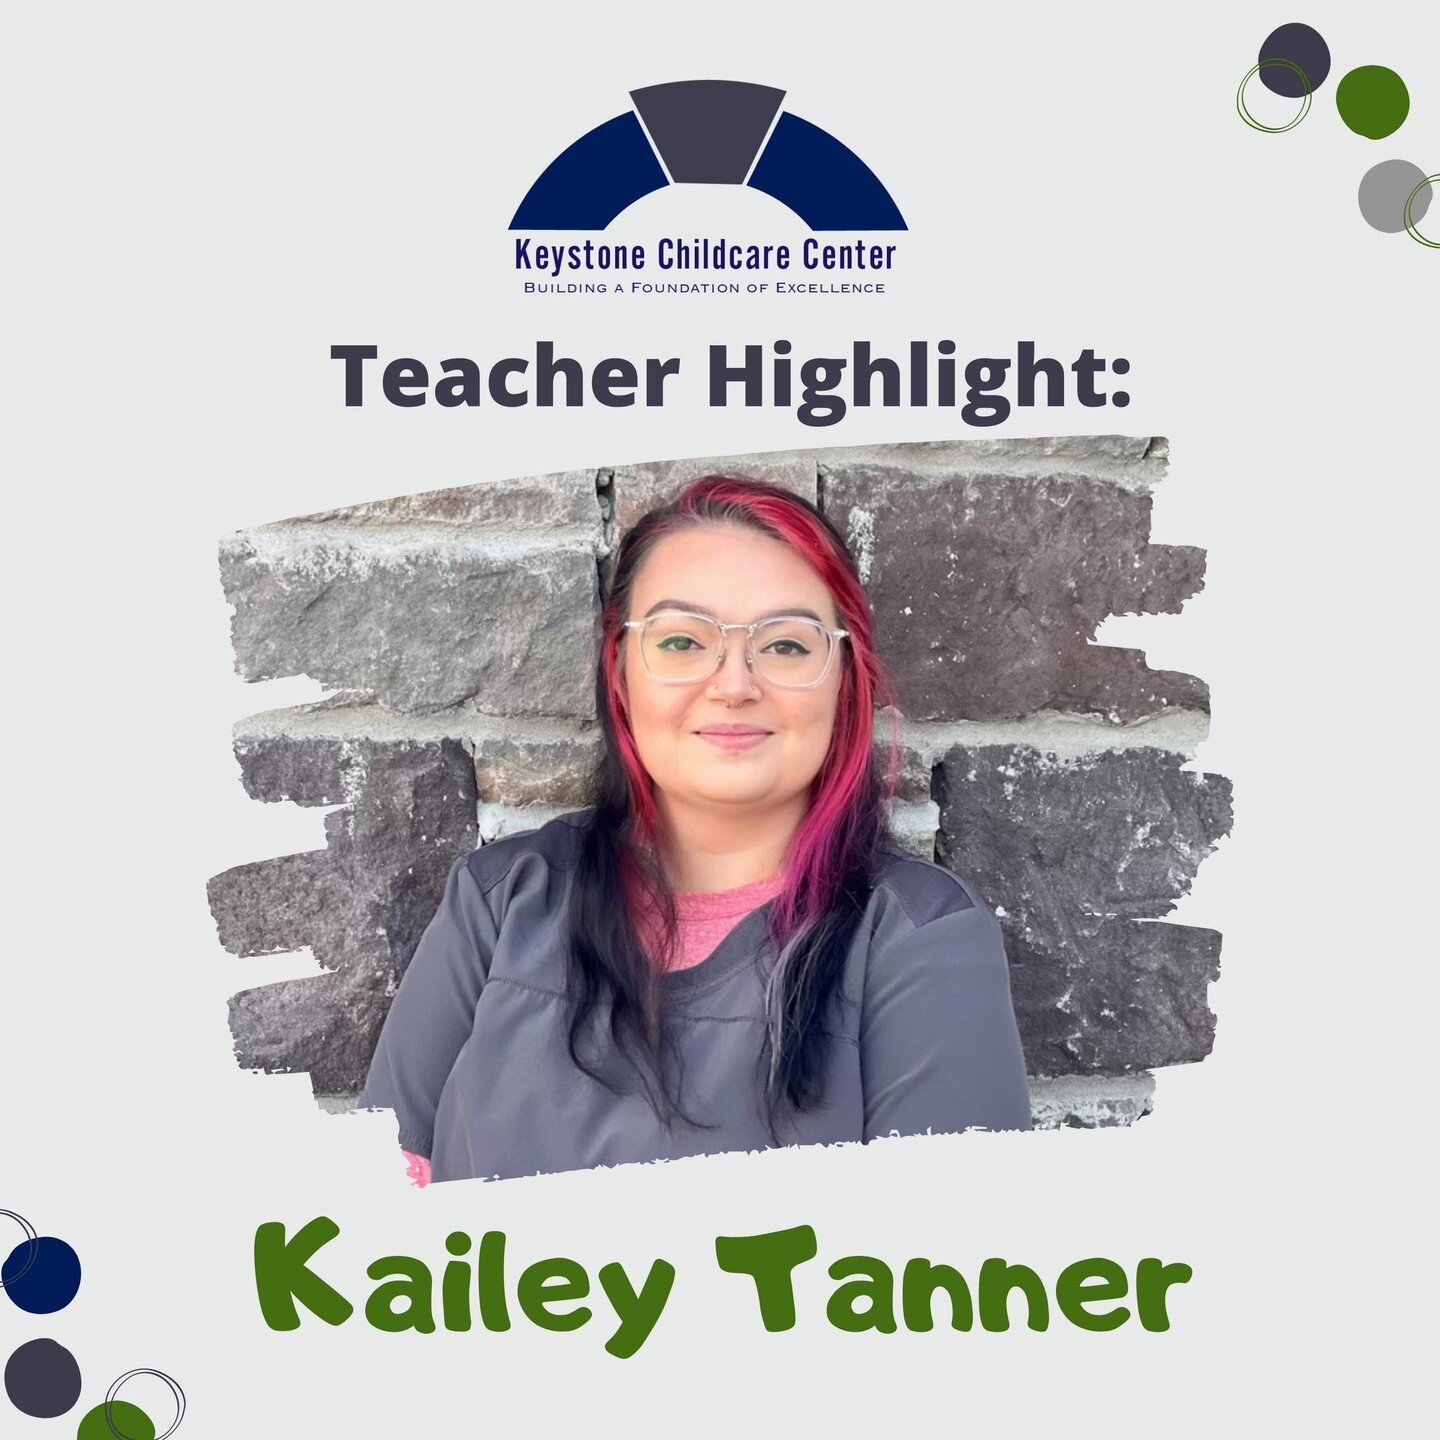 Meet Kailey, our Toddler 2 Co-Lead educator. ☀️⁠
⁠
Kailey is from TN, however most of her family resides in upstate New York. ⁠
⁠
She has been an educator for six years. ⁠
⁠
A fun fact about Kailey is that she enjoys collecting crystals! ✨